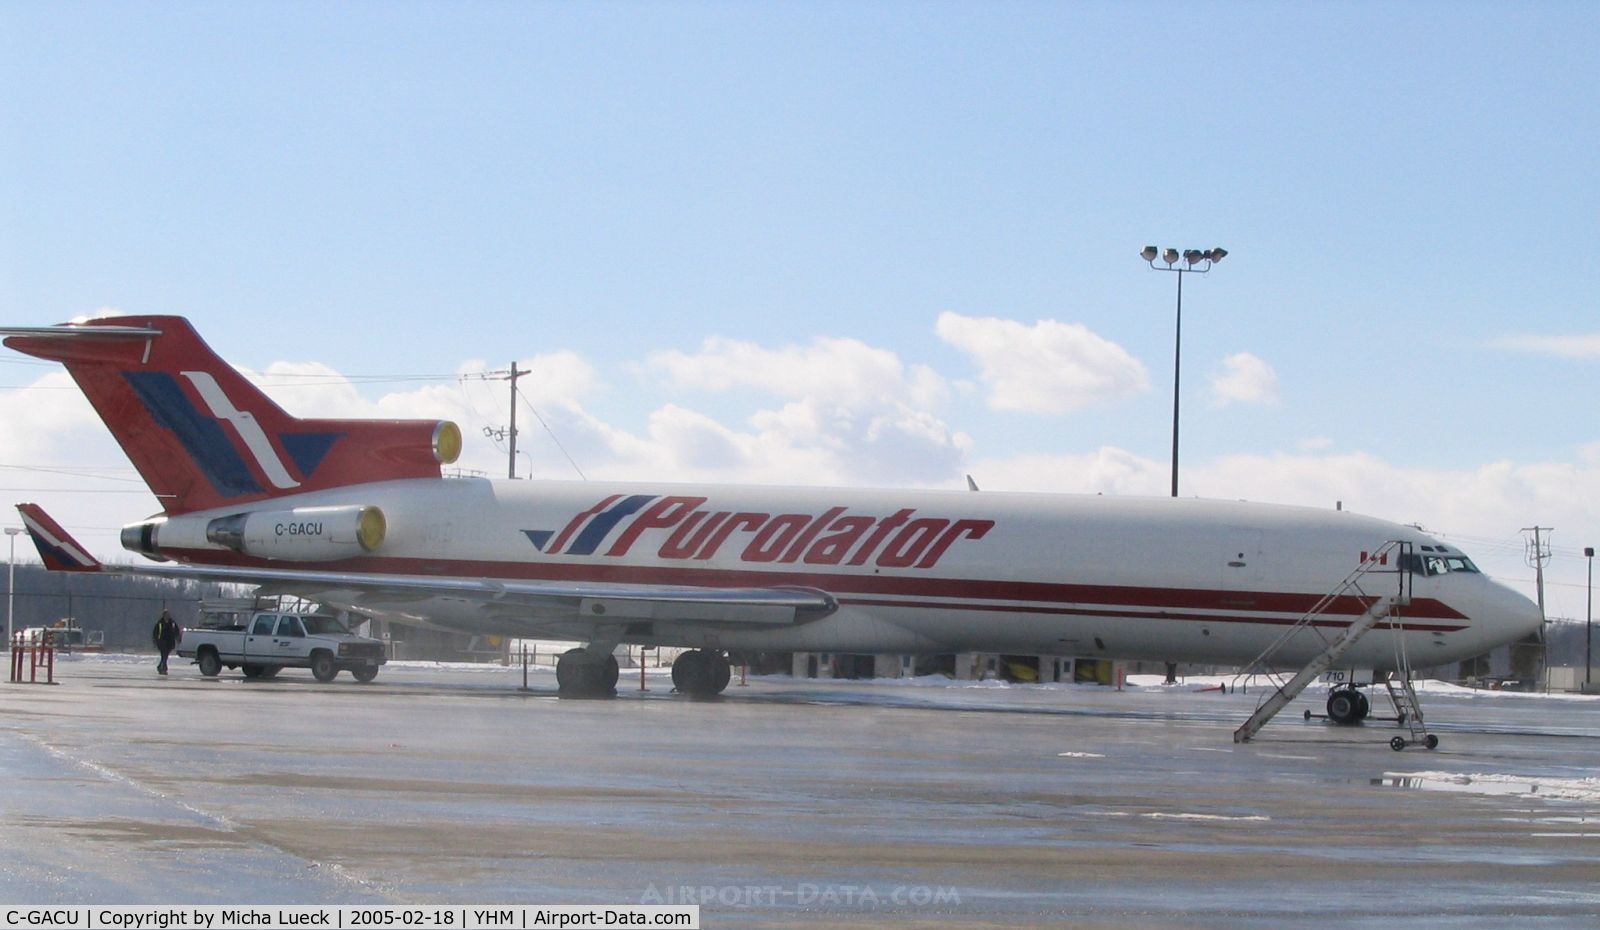 C-GACU, 1969 Boeing 727-225 C/N 20152, This old lady is in excellent condition and nicely fitted with winglets